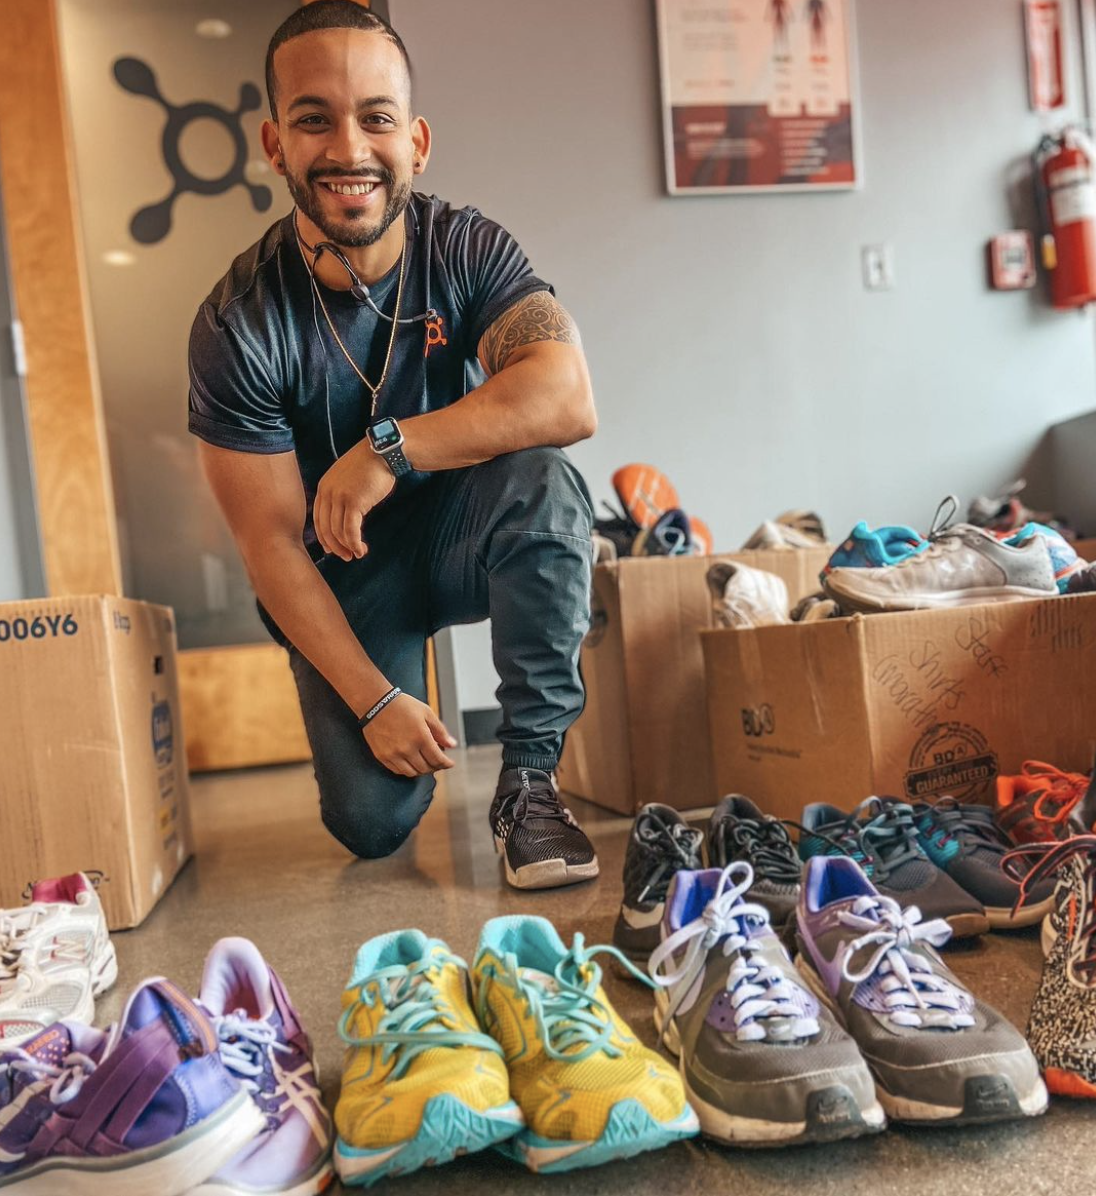 Soles4souls, the shoe charity, to provide shoes and clothing to